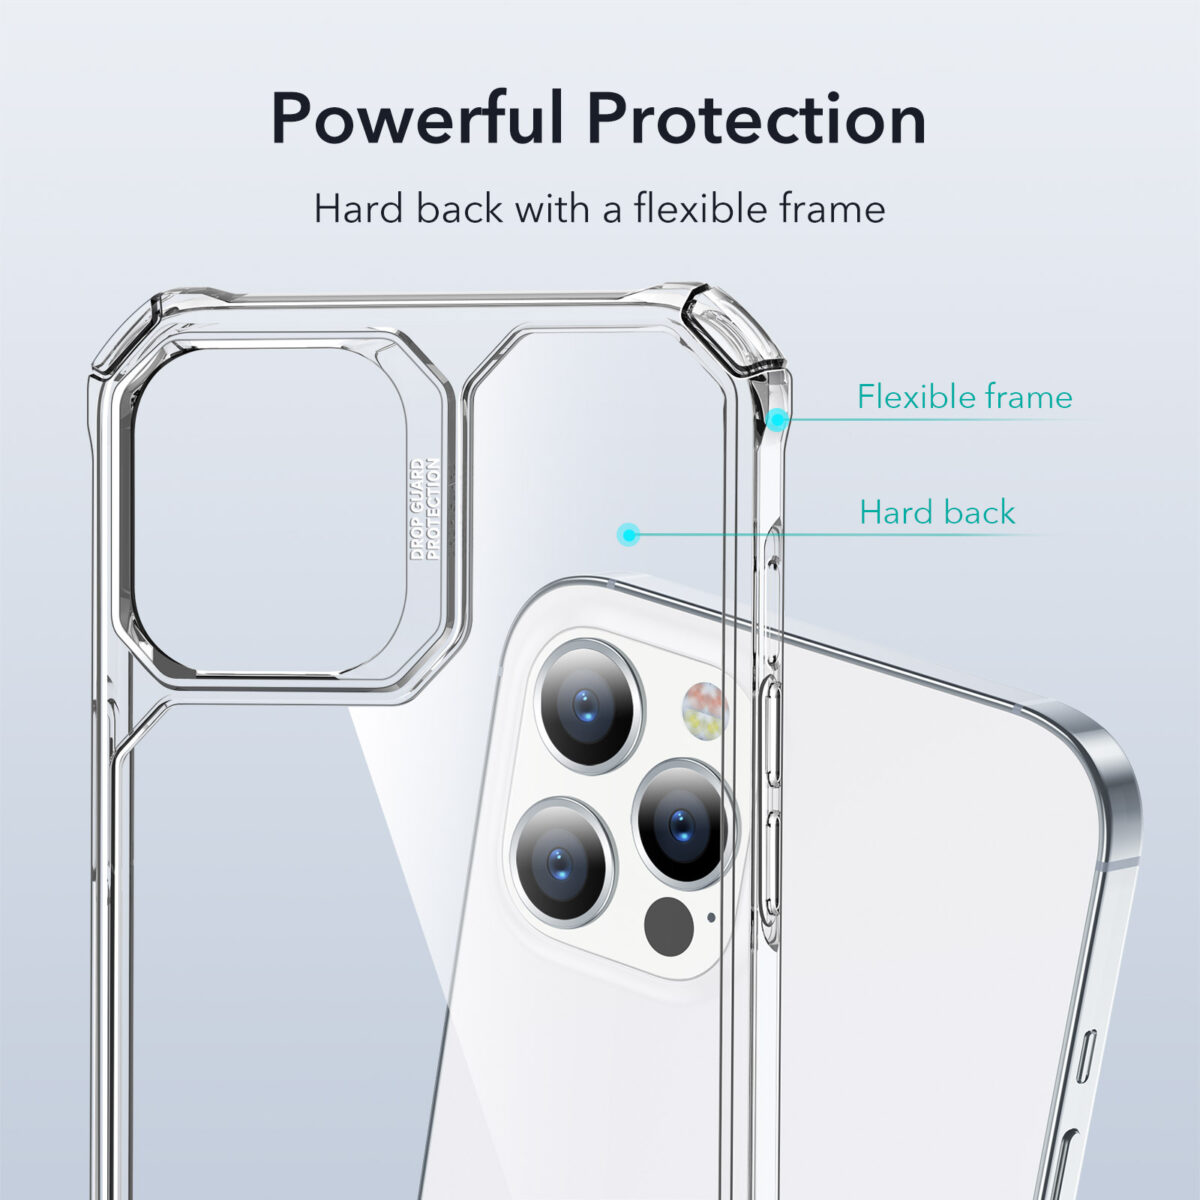 Powerful Protection case for iPhone 12